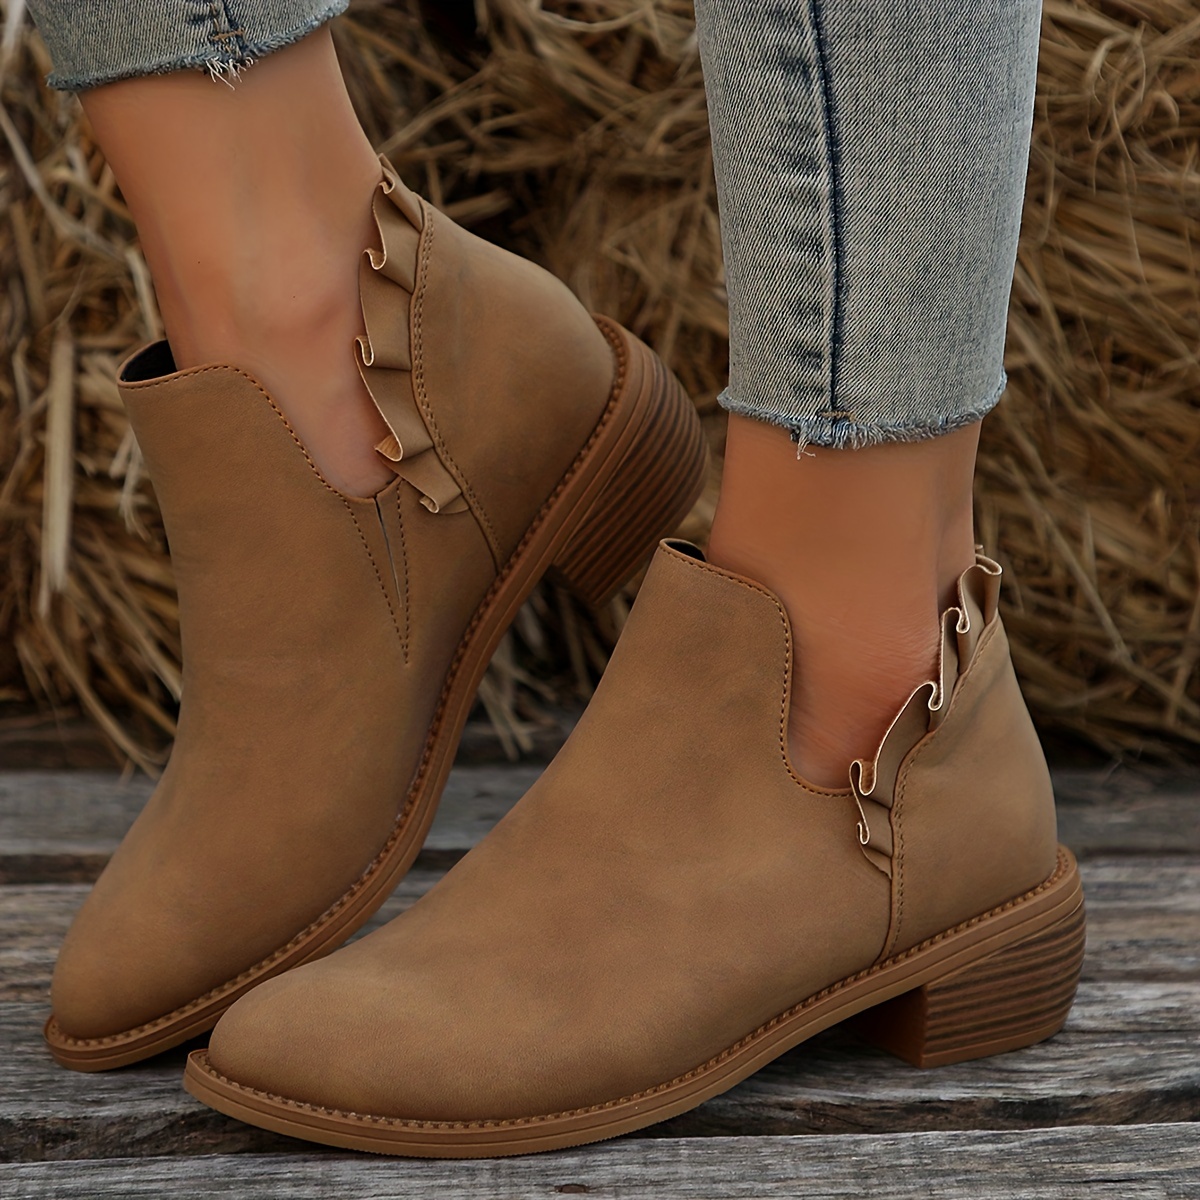 Women's Chunky Low Heeled Booties * Detail V-cut Slip On Ankle Boots, Retro  Stacked Heeled Short Boots